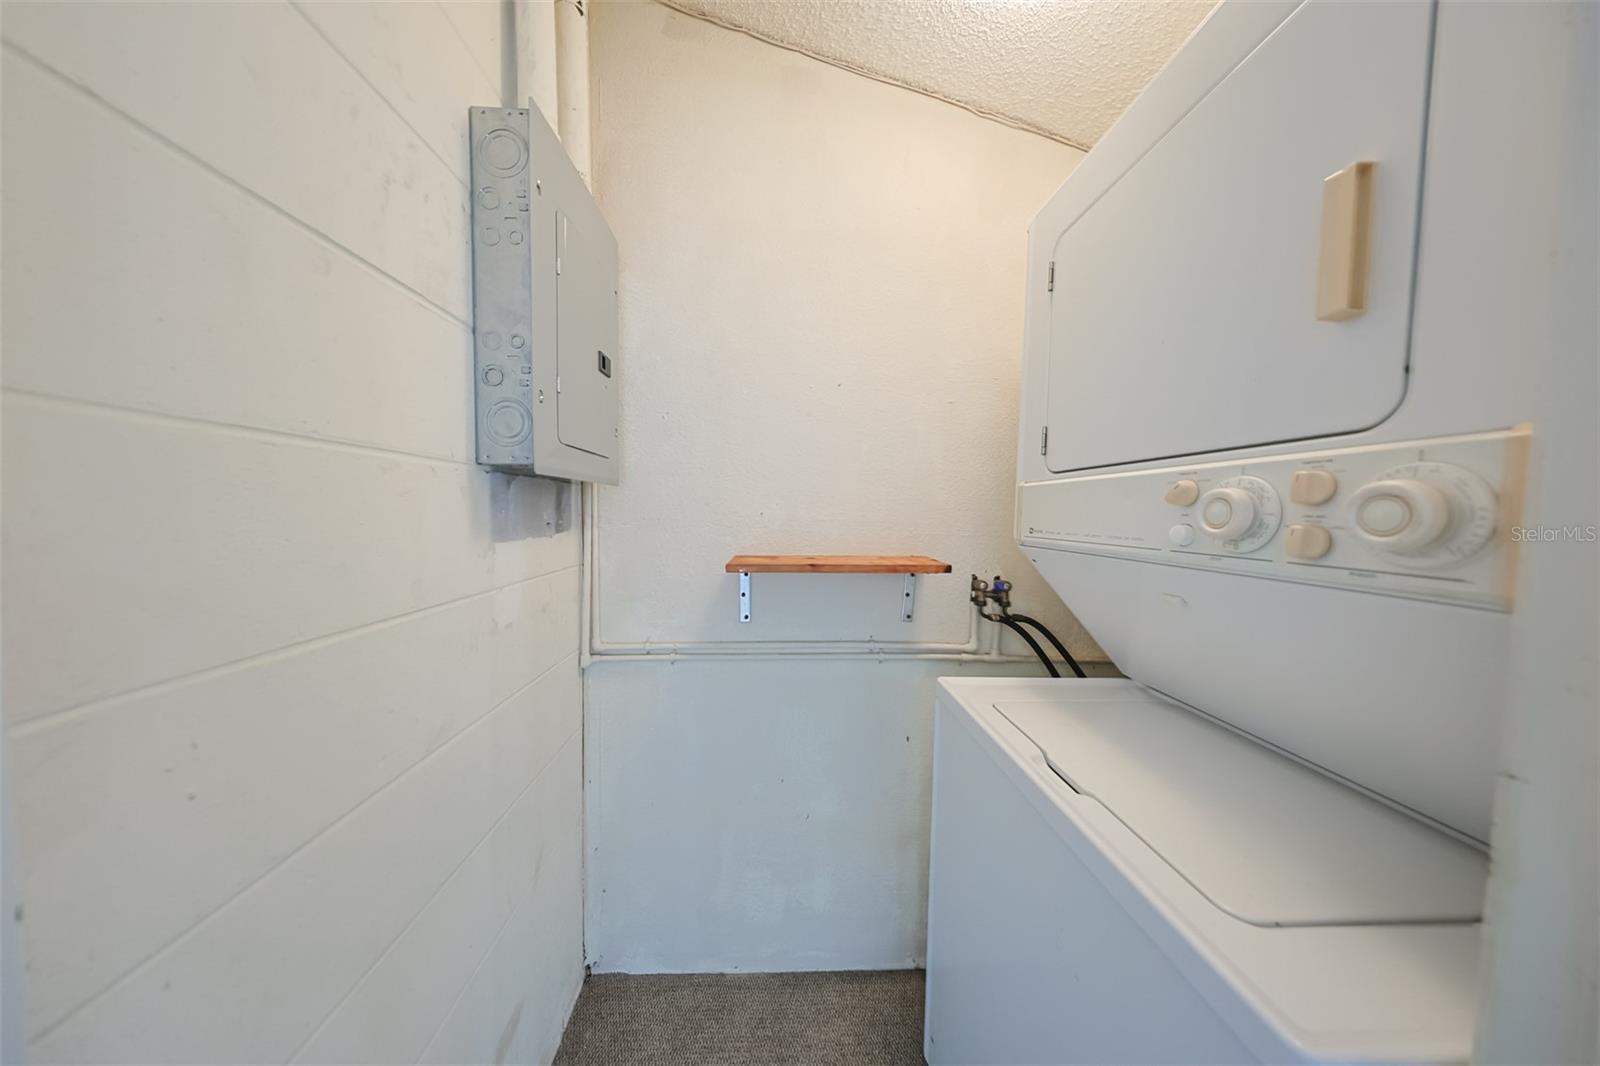 Within the Lanai, room for Washer and Dryer